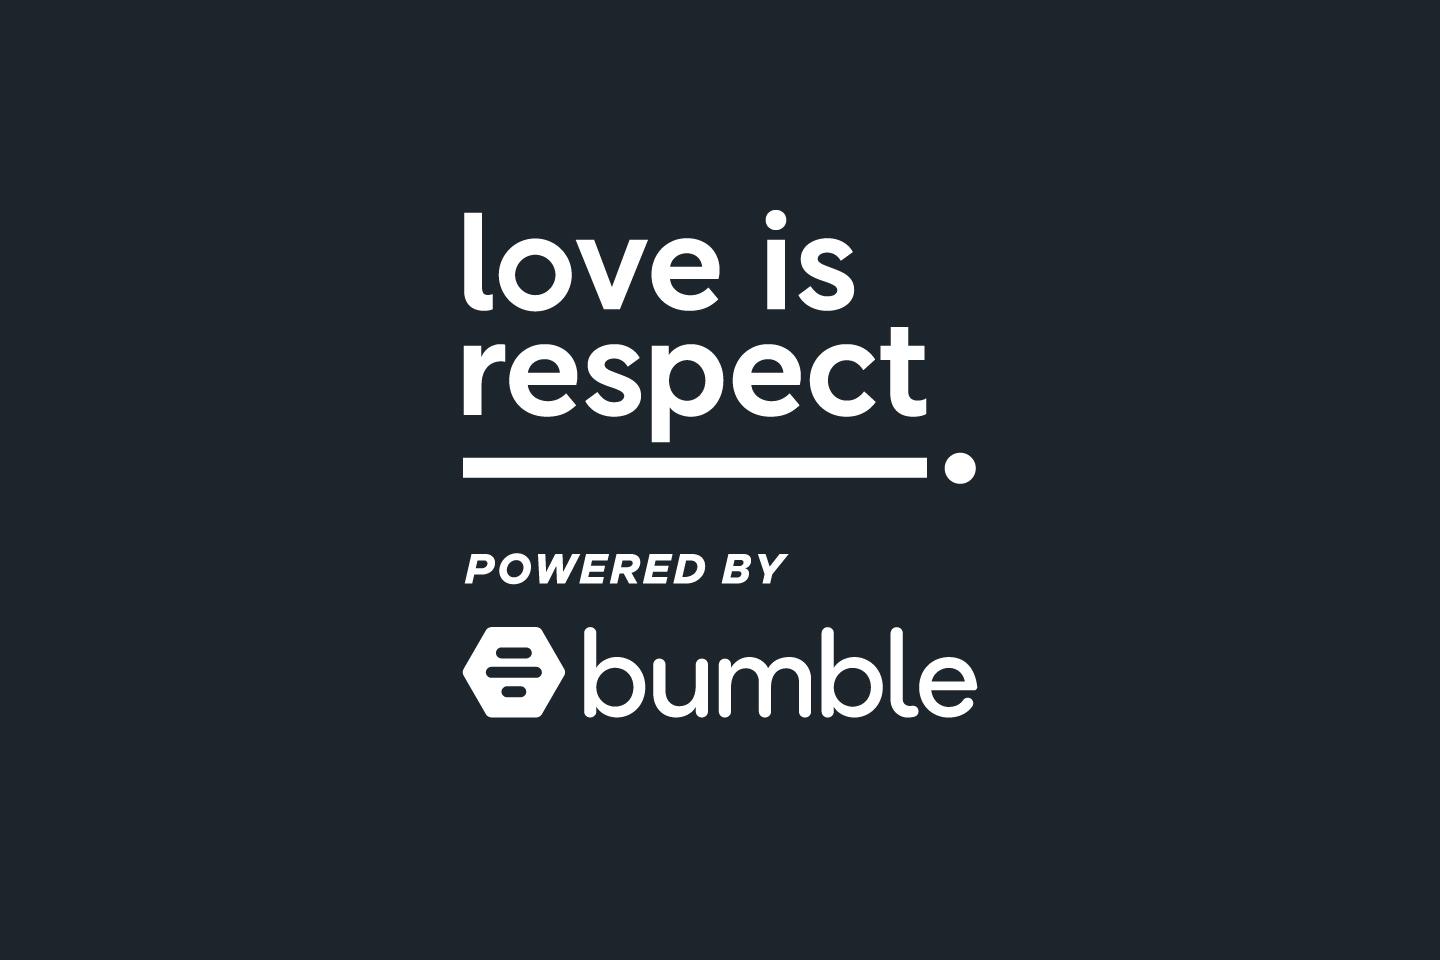 Bumble Joins Forces With the National Domestic Violence Hotline to Help Stop Abusive Relationships